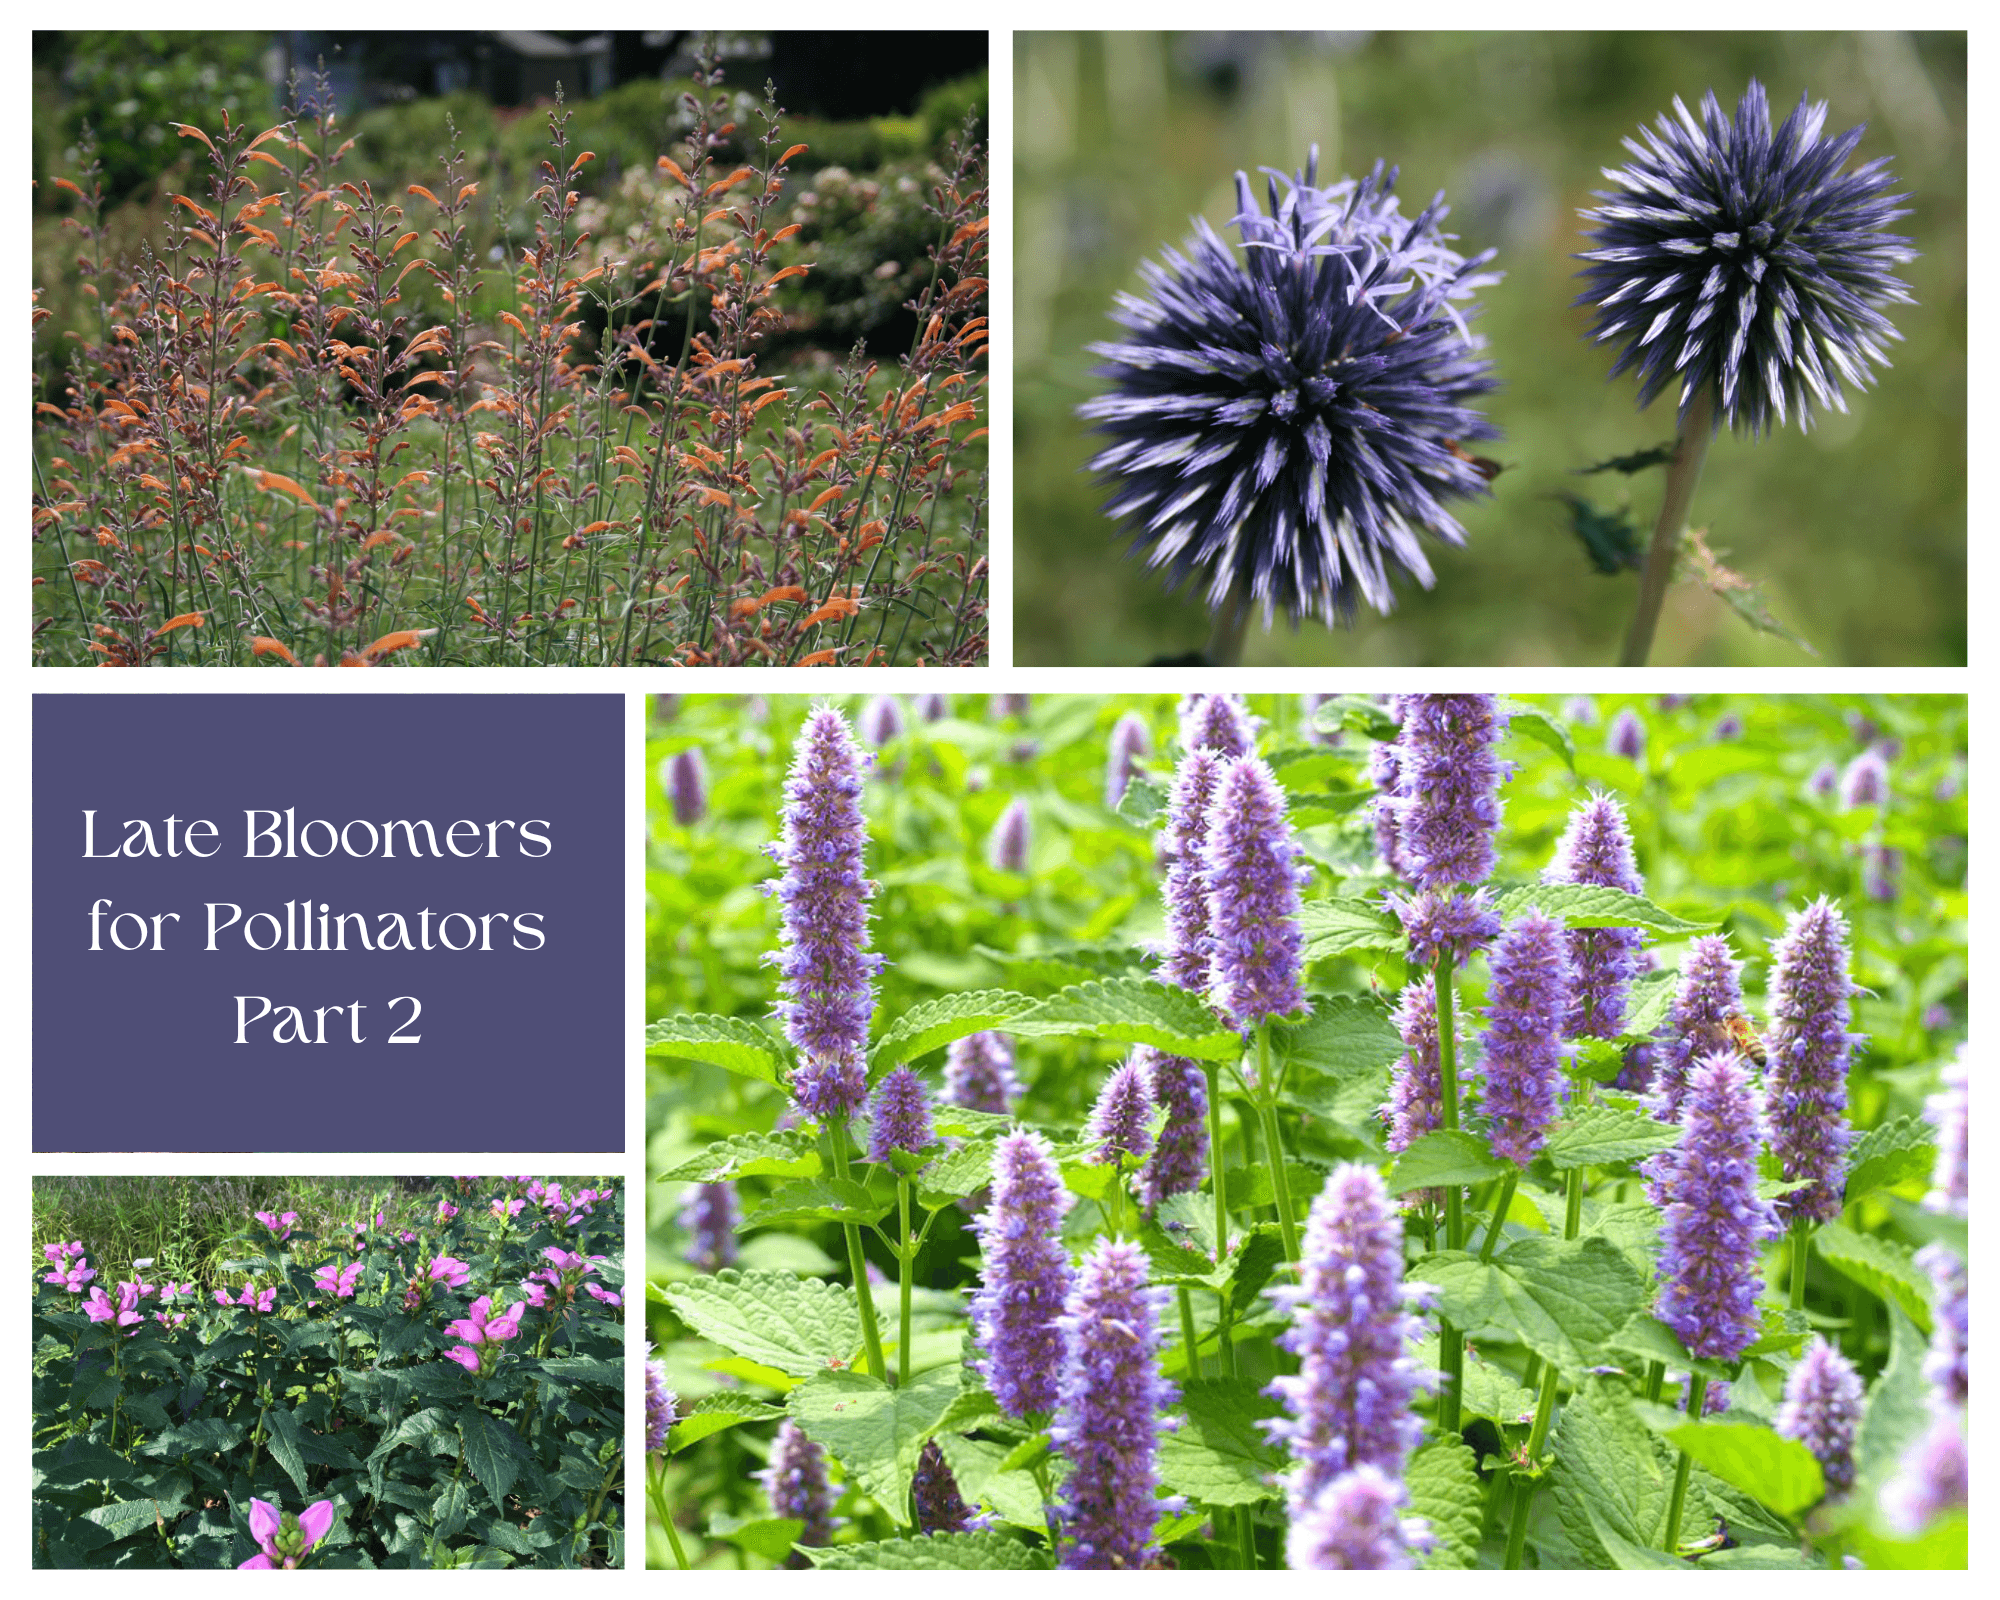 Late blooming pollinator plants help feed bees and other pollinating insects into the fall. 